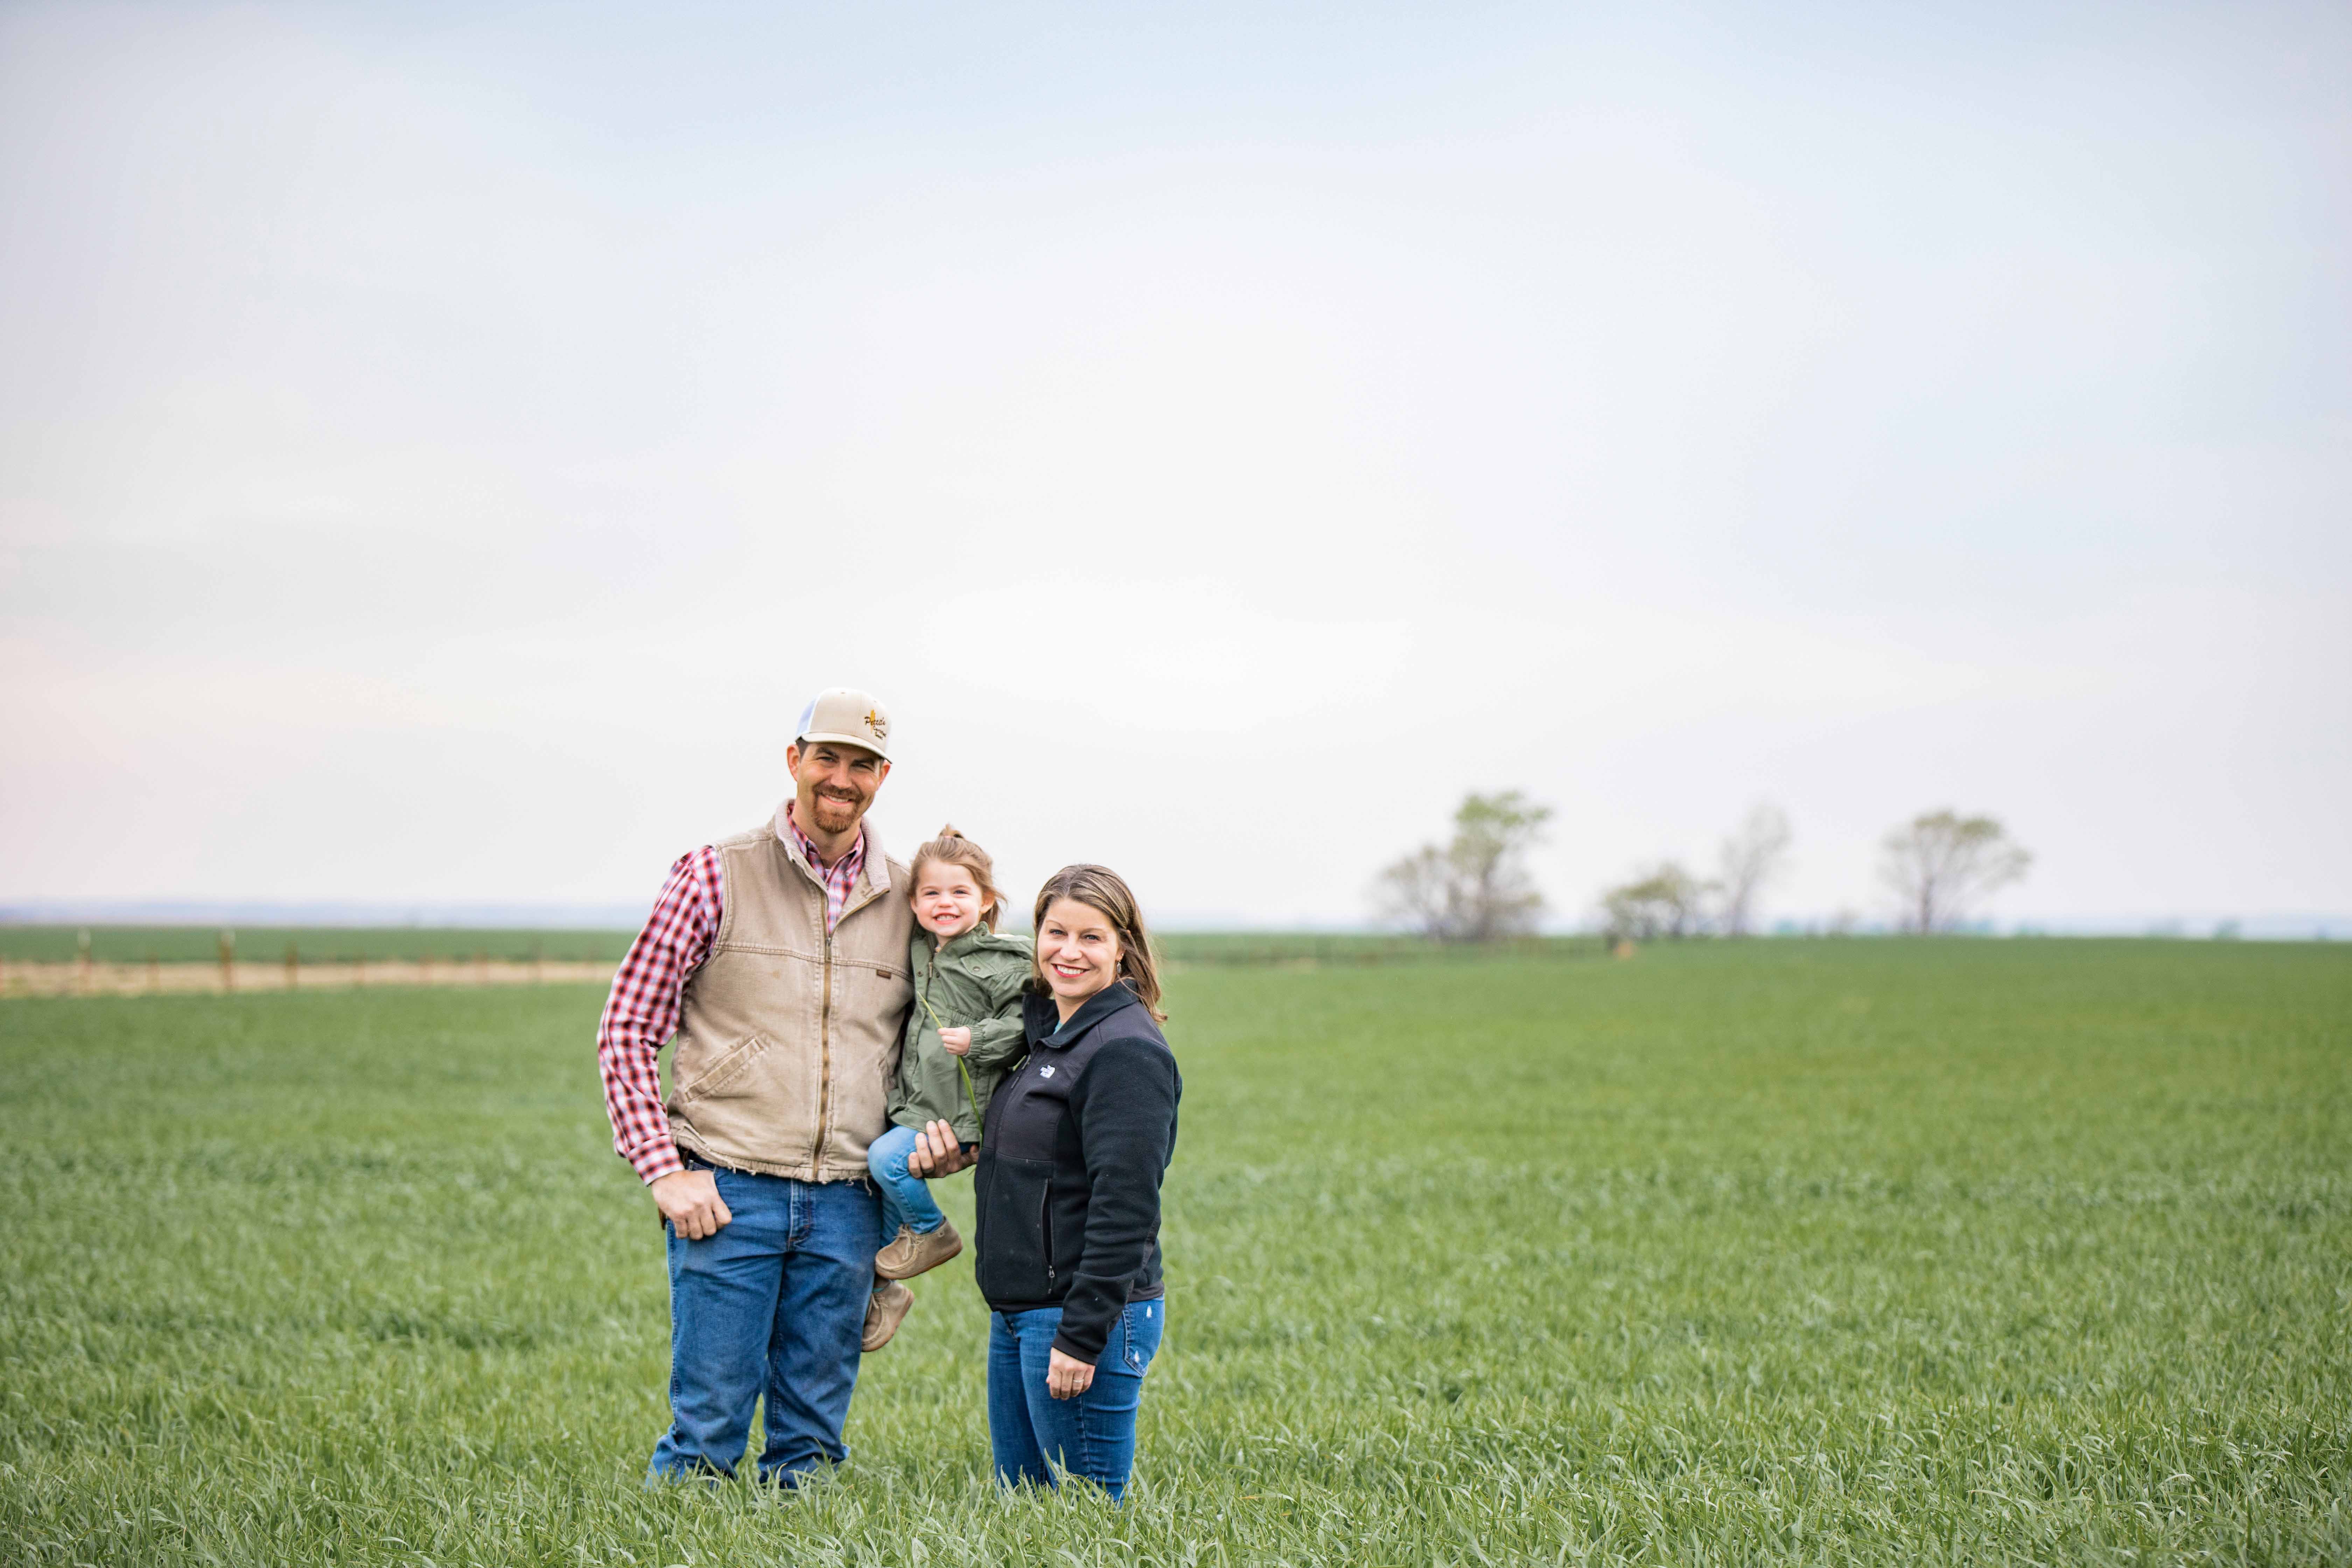 Two people and a child standing in a field smiling